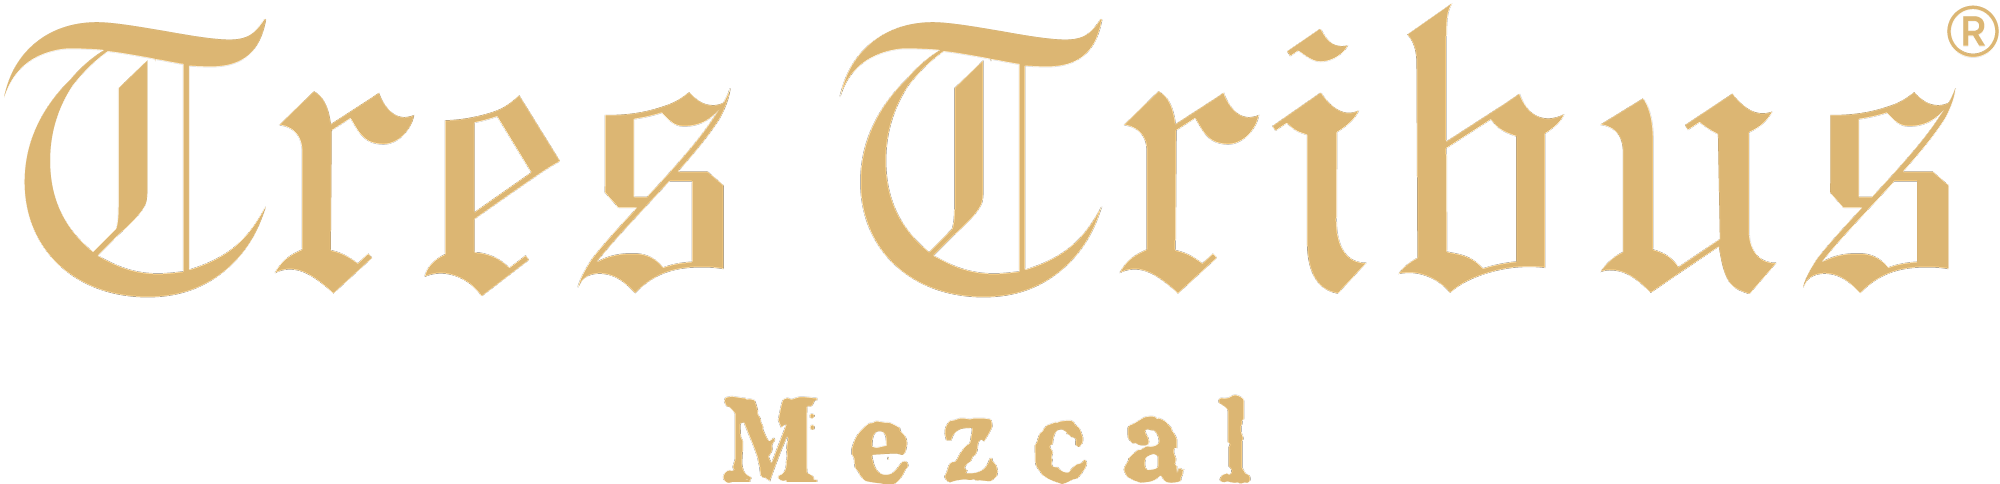 Tres-Tribus-Written-Word-With-Mezcal-Primary-Brand-Logo-Gold-Transparent - Isabella Ordway.png